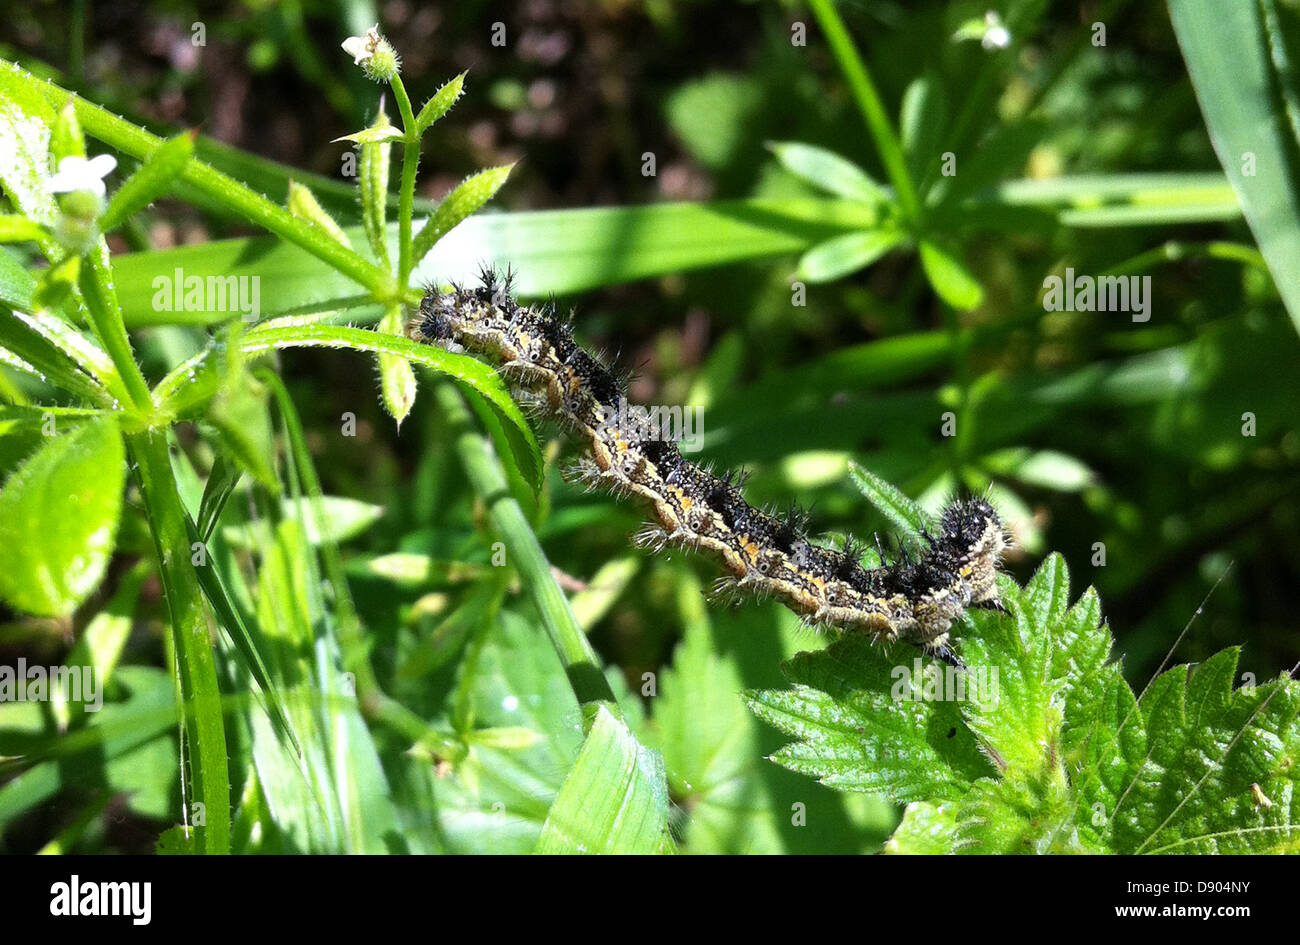 SMALL TORTOISESHELL BUTTERFLY (Aglais urticae) adult caterpillar on Cleavers in June. Photo Tony Gale Stock Photo